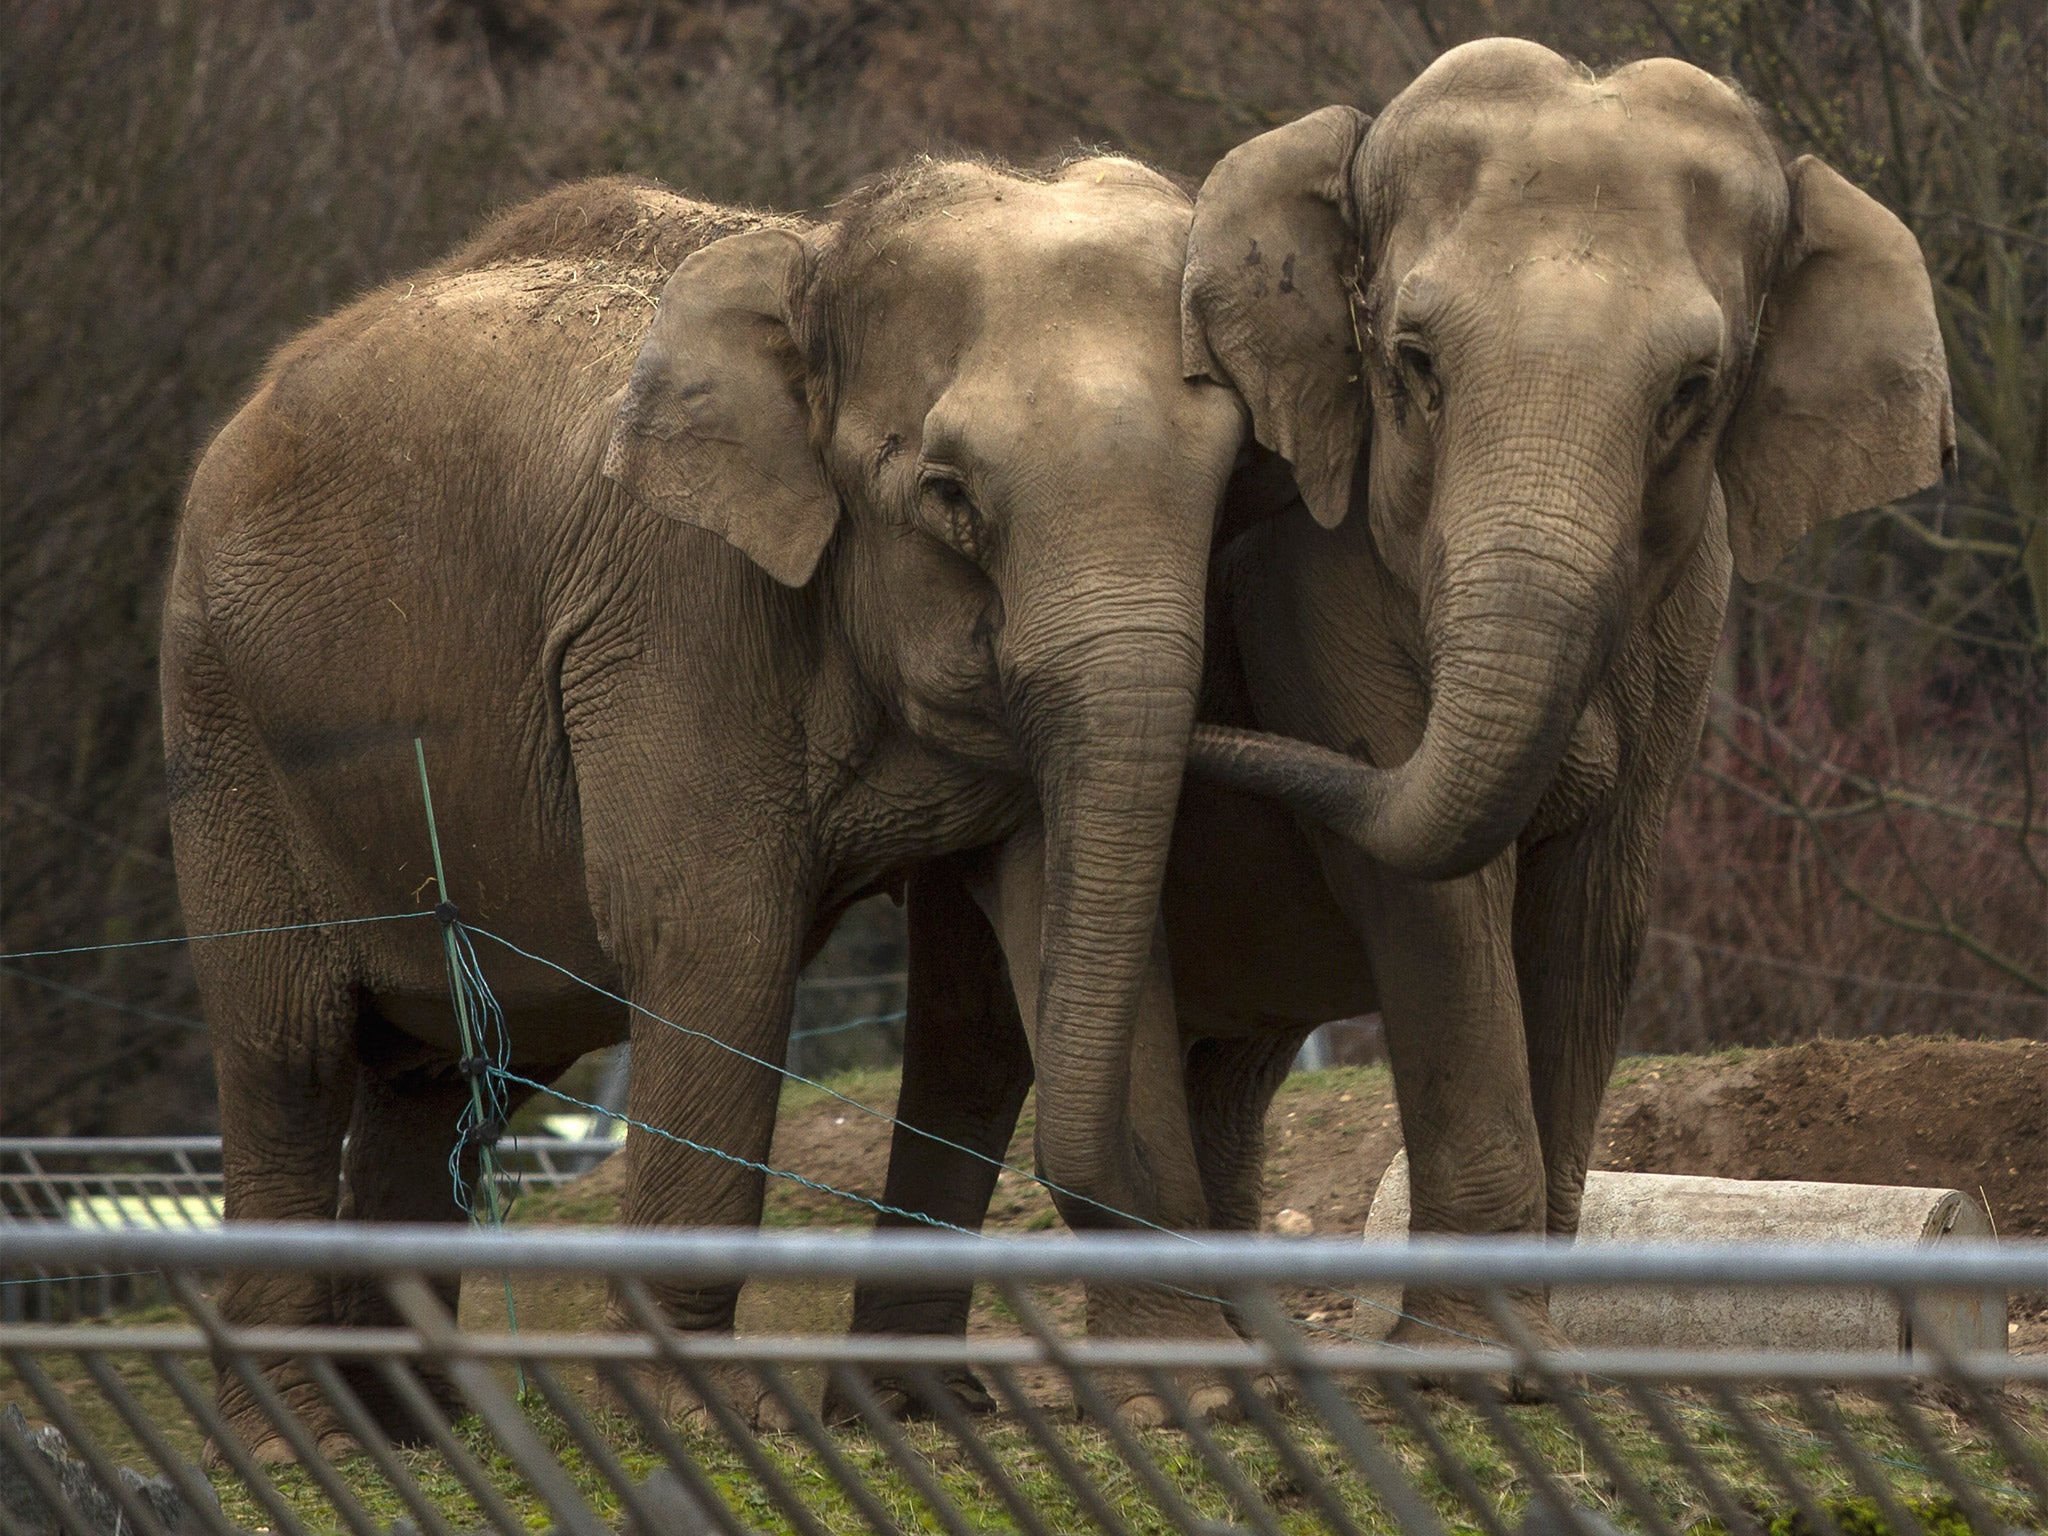 The elephants were exiled to a zoo in Lyon in 1999